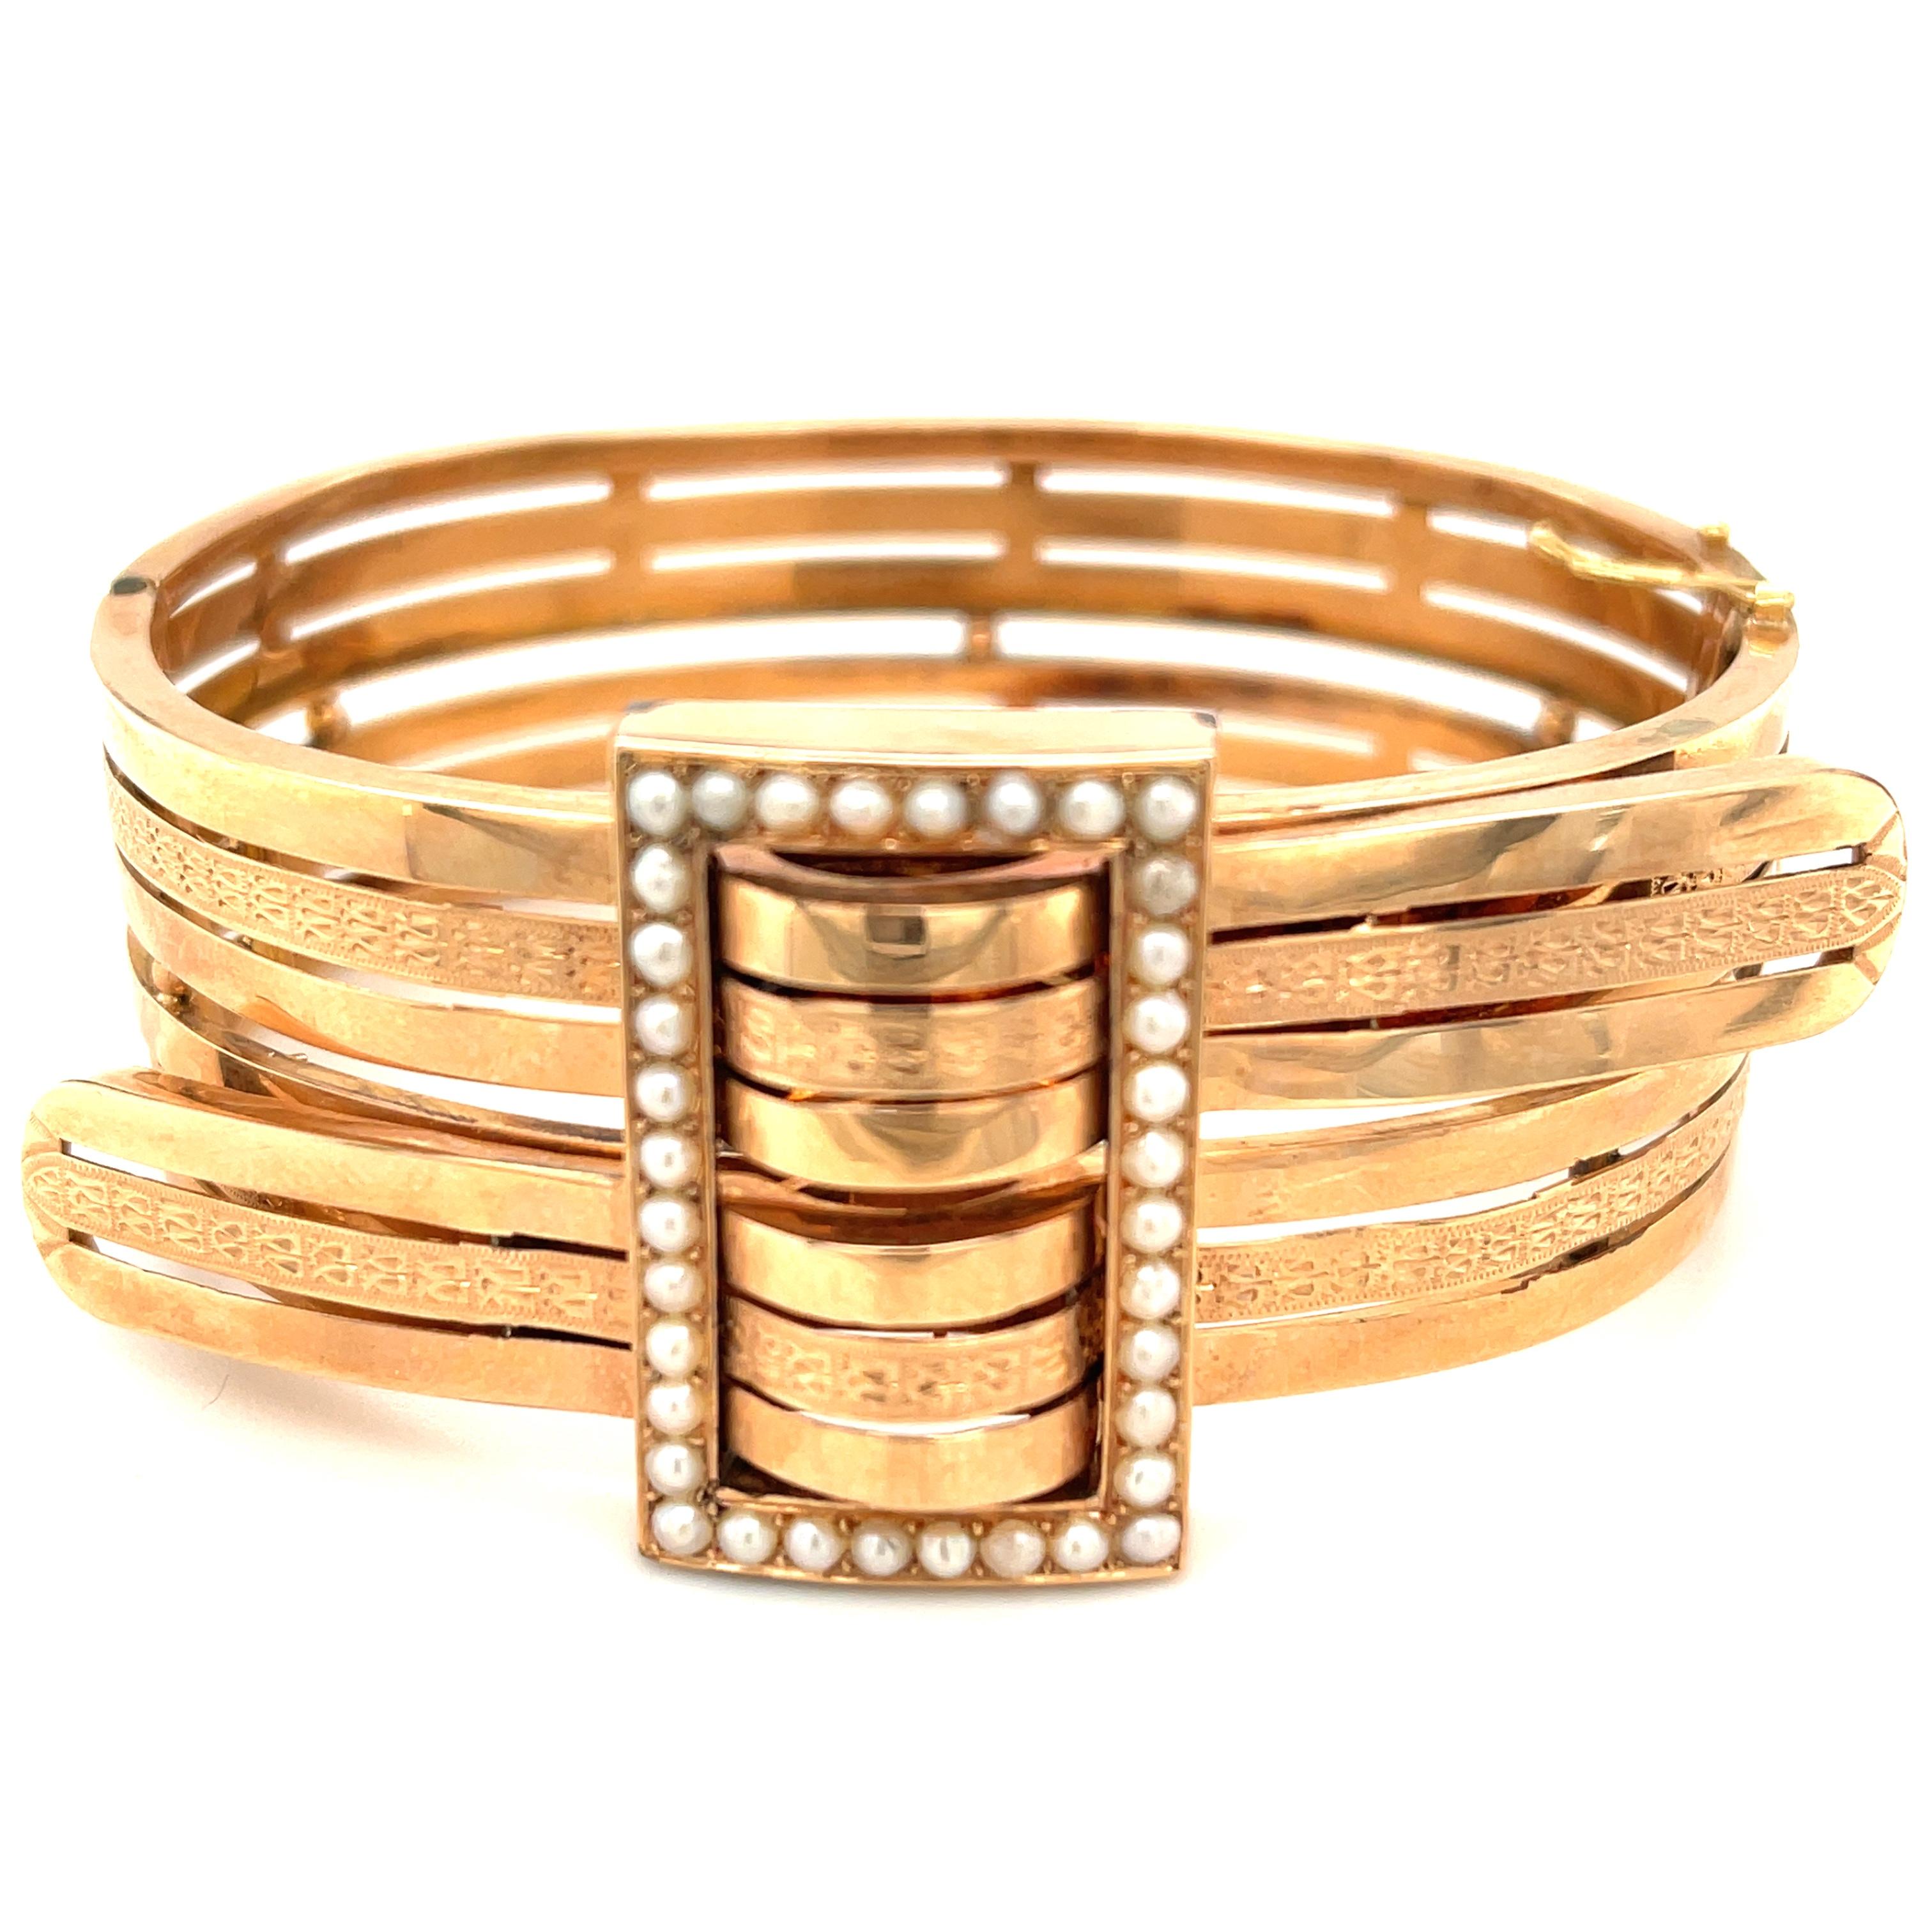 A lovely 18k rose gold Victorian bypass bangle bracelet set of a buckle design set with pearls circa 1890. Designed as two gold ribbons with engraving woven through a buckle that is set with split pearls. A very sentimental and Victorian design. The